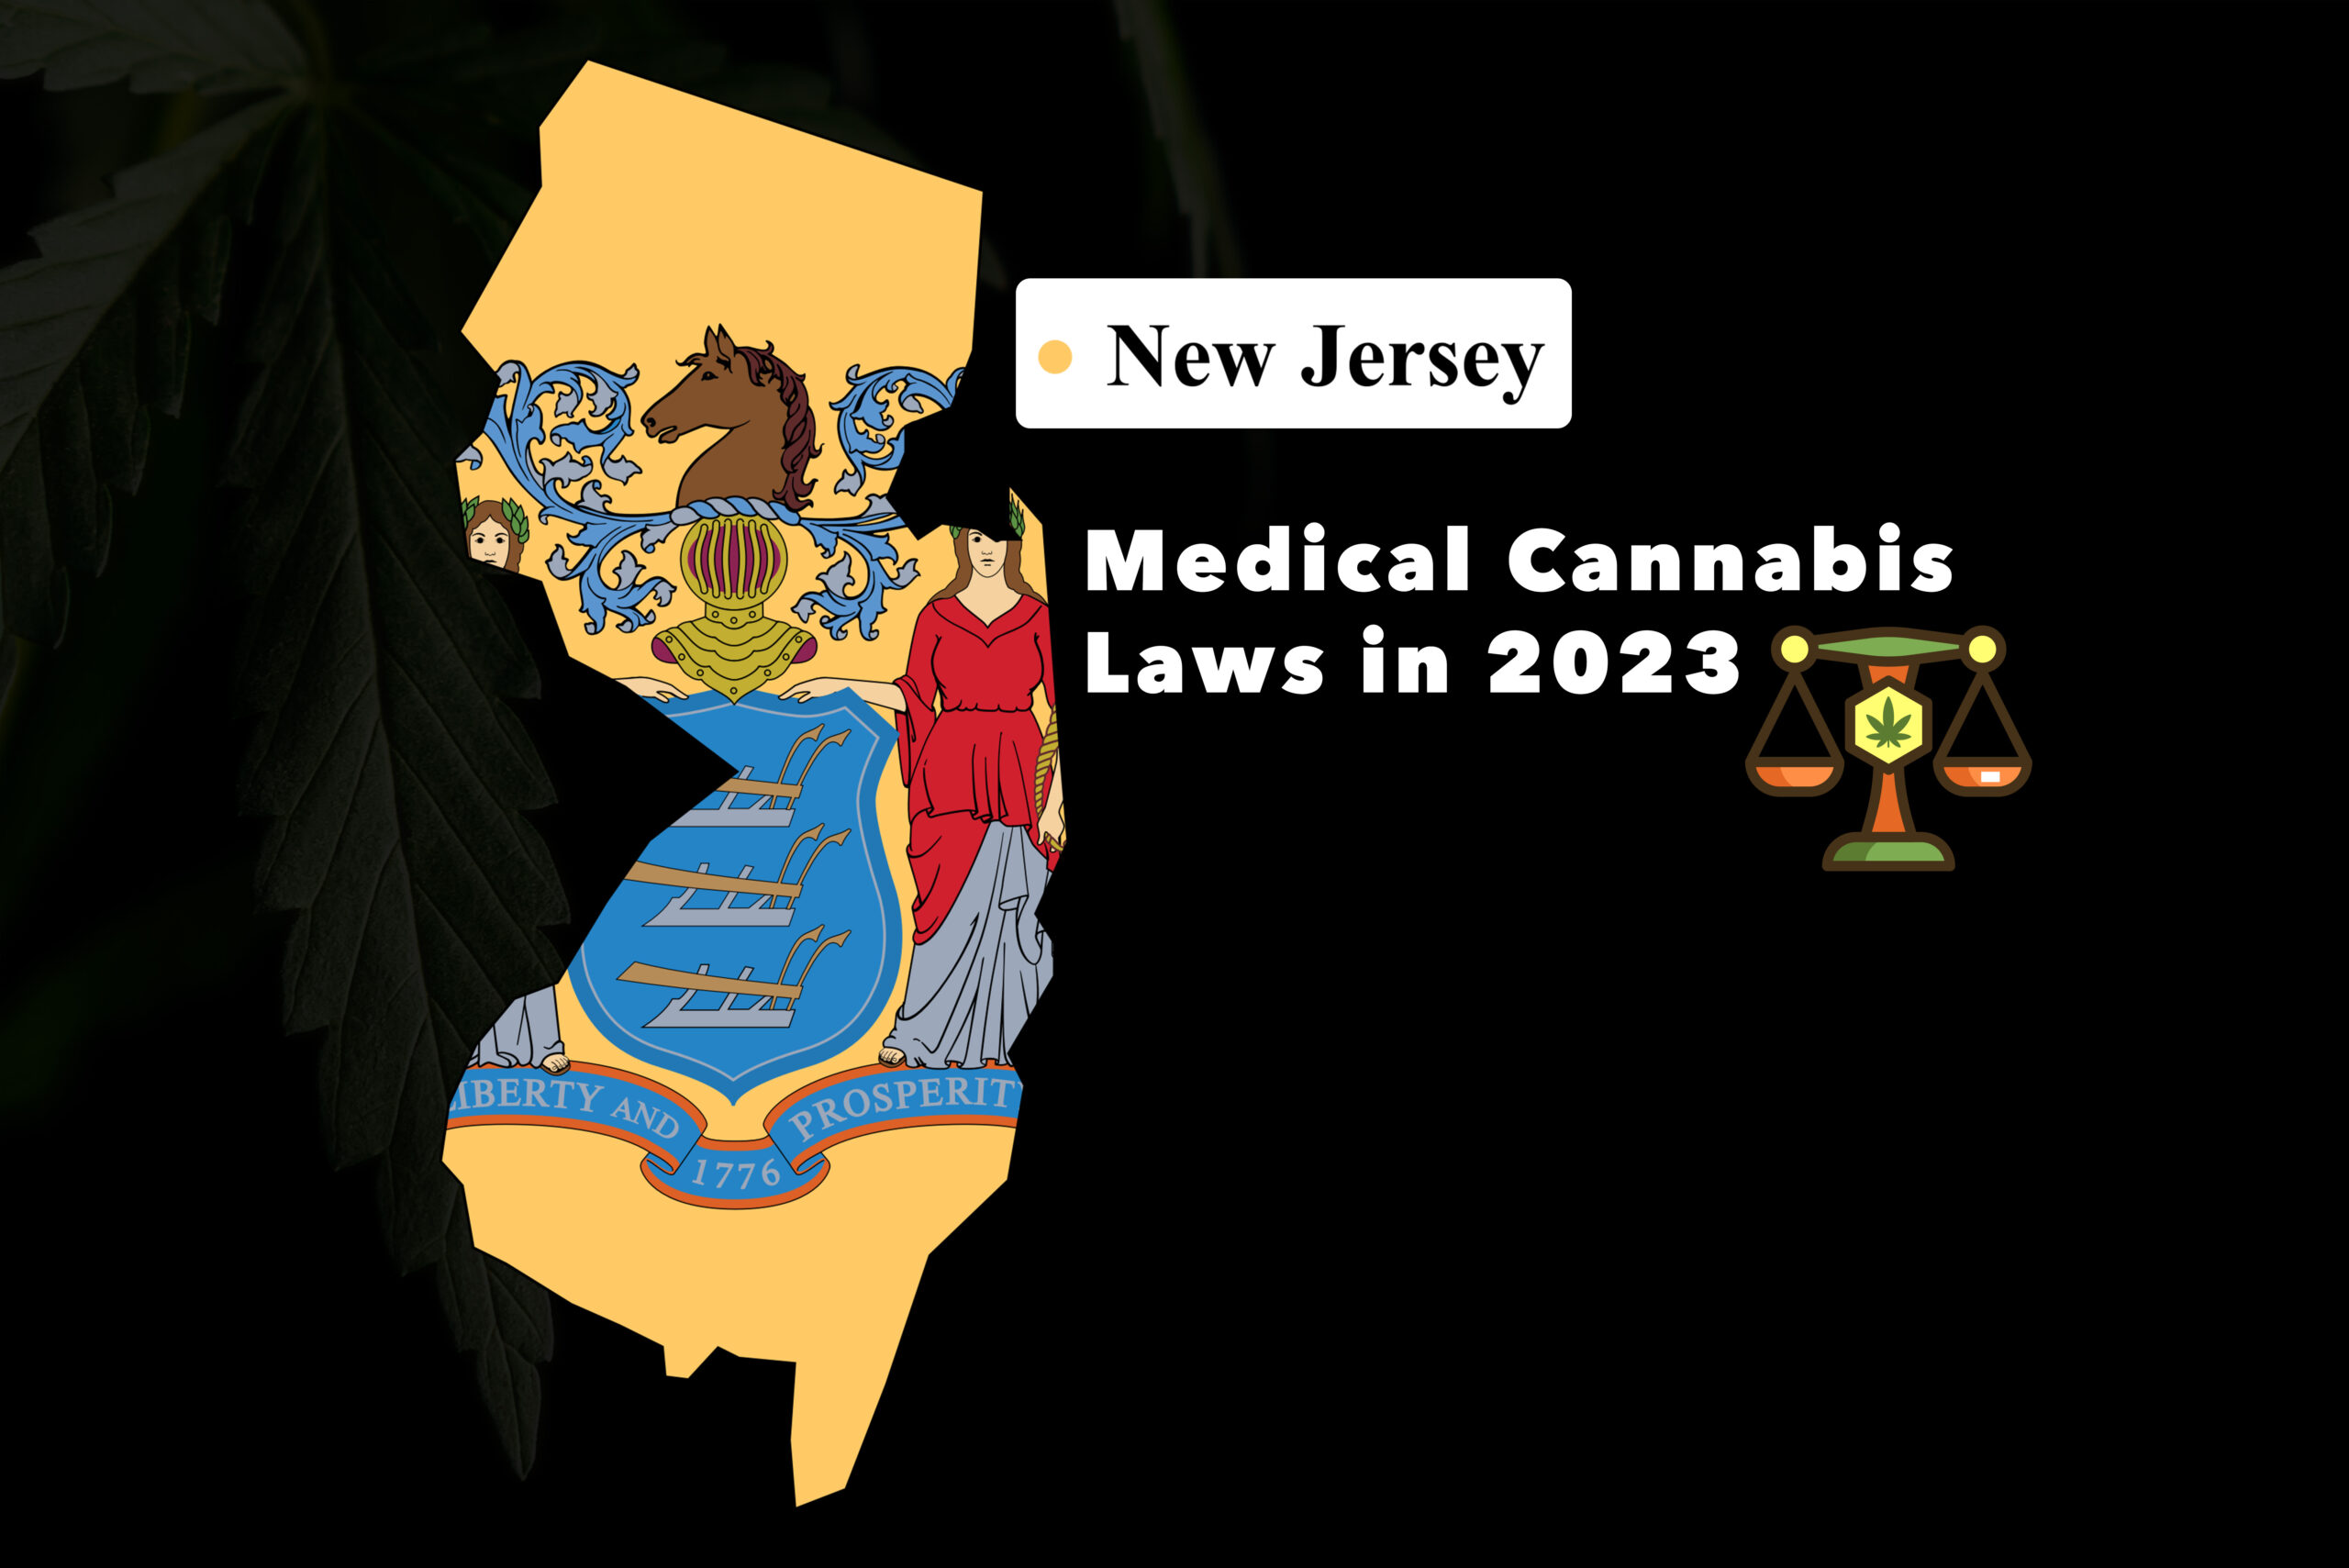 New Jersey Medical Cannabis Laws in 2023